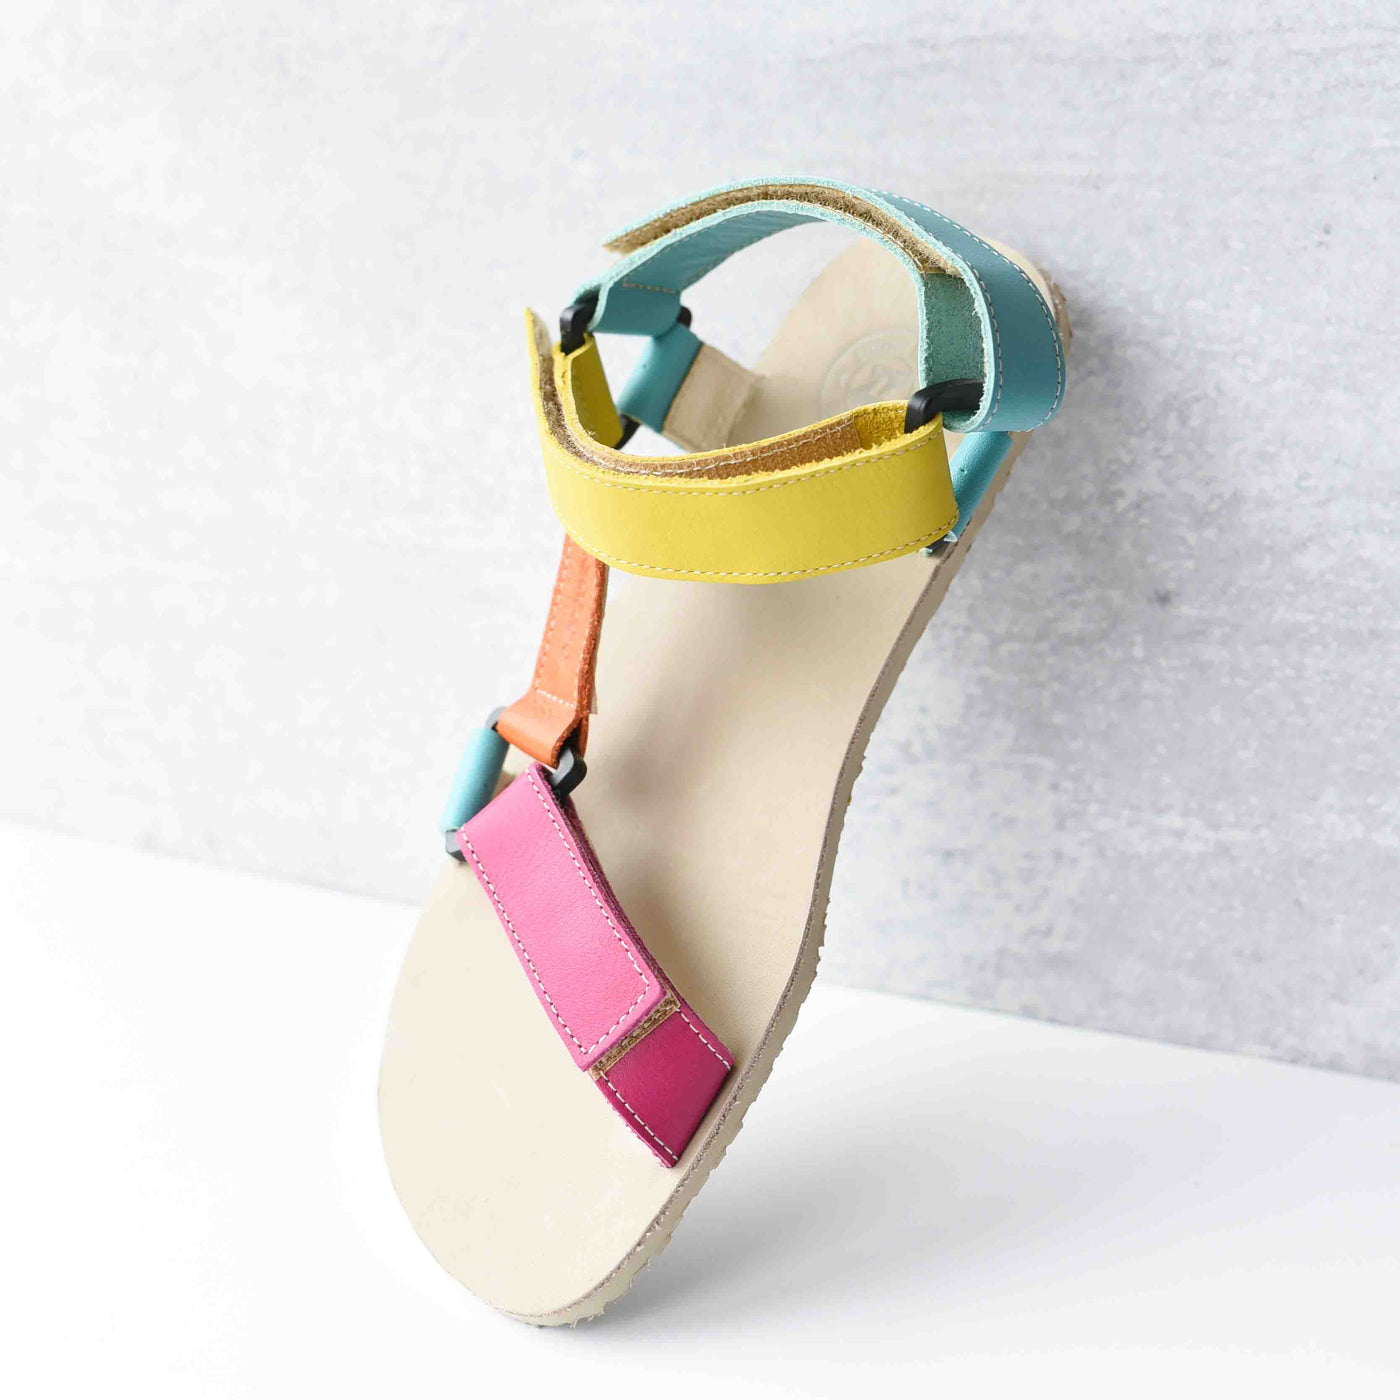 A photo of Zeezoo Olymp Rainbow sandals made from leather with velcro and a light beige leather topped rubber soles. The sandal straps are pink, light blue, orange, and yellow. The straps cross the front of the foot and a single strap runs along the outside of the top of the foot and around the ankle and heel. The left sandal is shown upright leaning up against a light grey colored wall and white floor. #color_rainbow-olymp